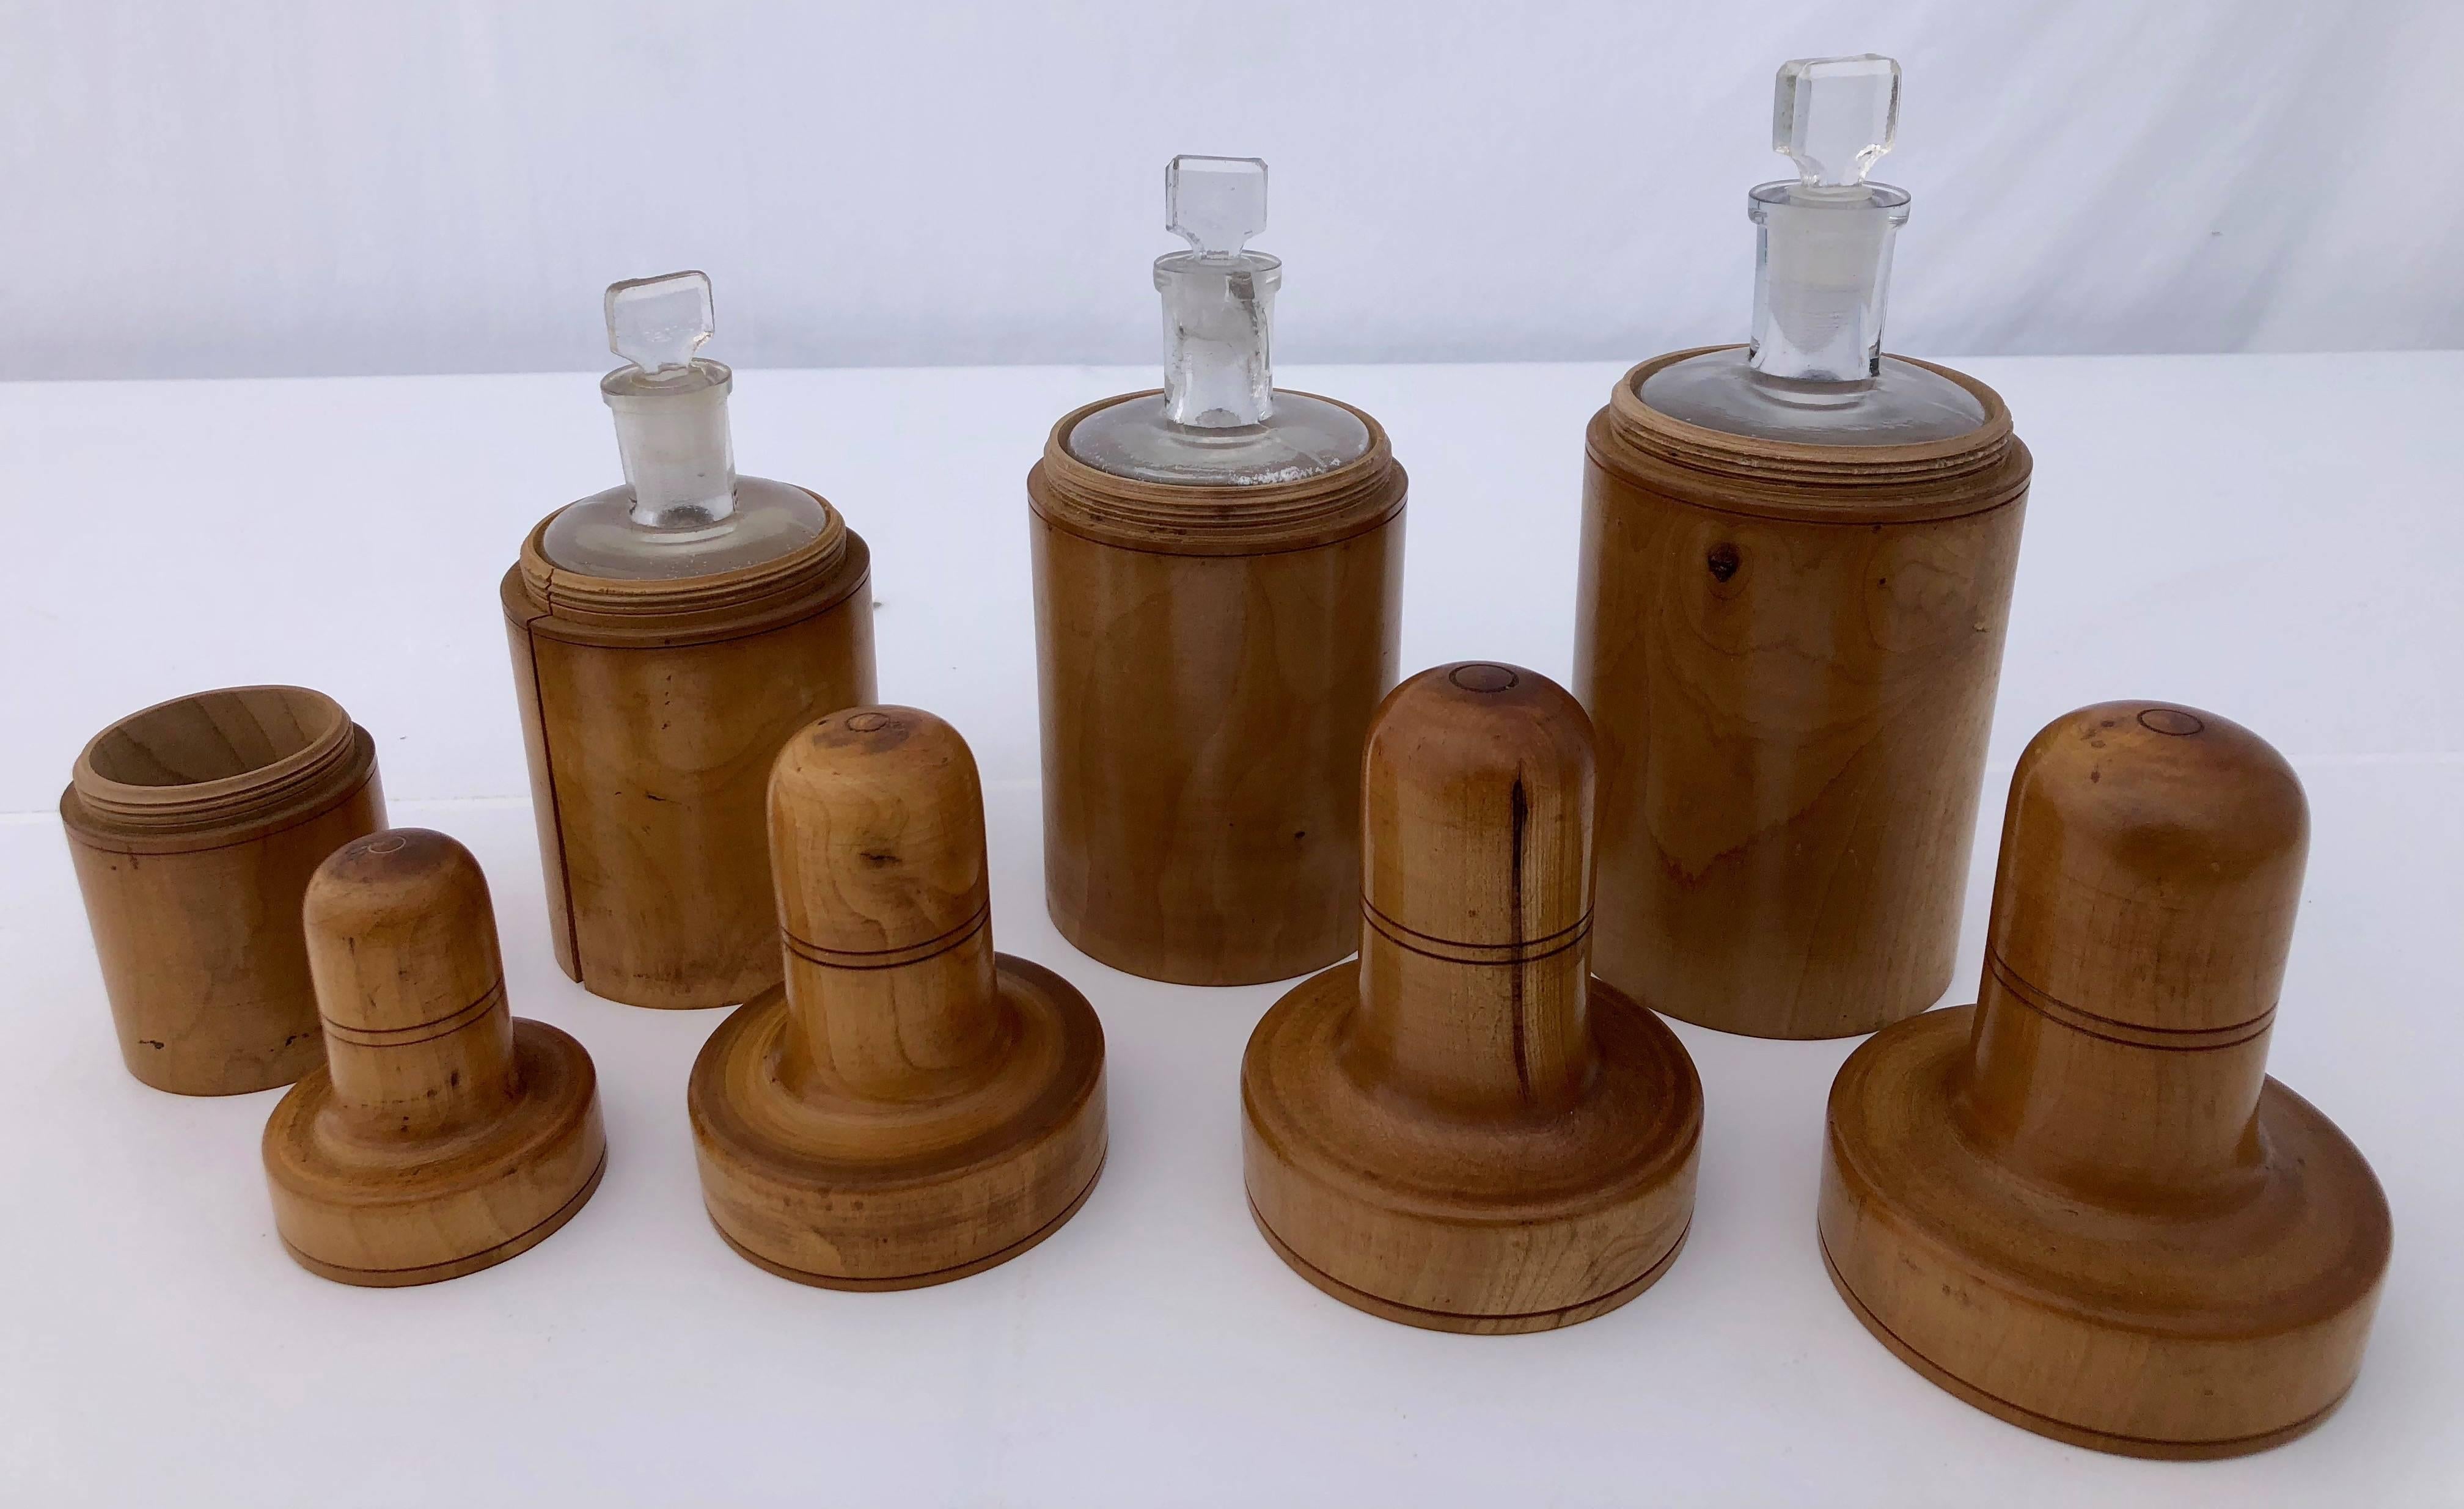 French Apothecary Boxwood Treen Boxes with Glass Bottles 1800s, 11 Pieces In Good Condition For Sale In Petaluma, CA